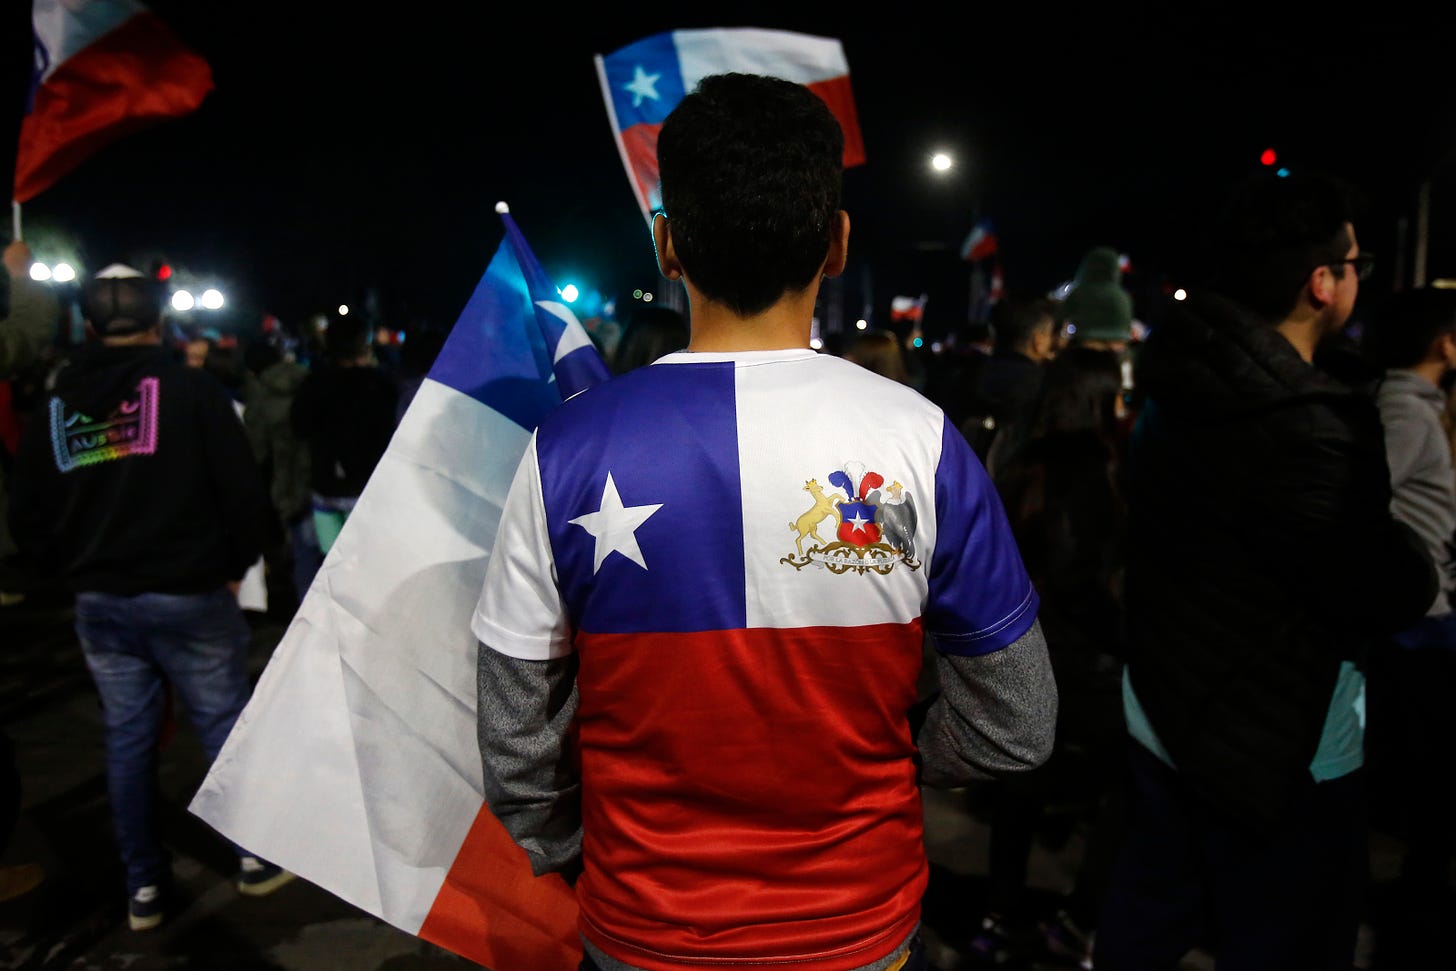 A demonstrator against the proposed constitution wears a jersey featuring the colors of the Chilean flag on September 4, 2022. (Photo by Jonnathan Oyarzun/Getty Images).